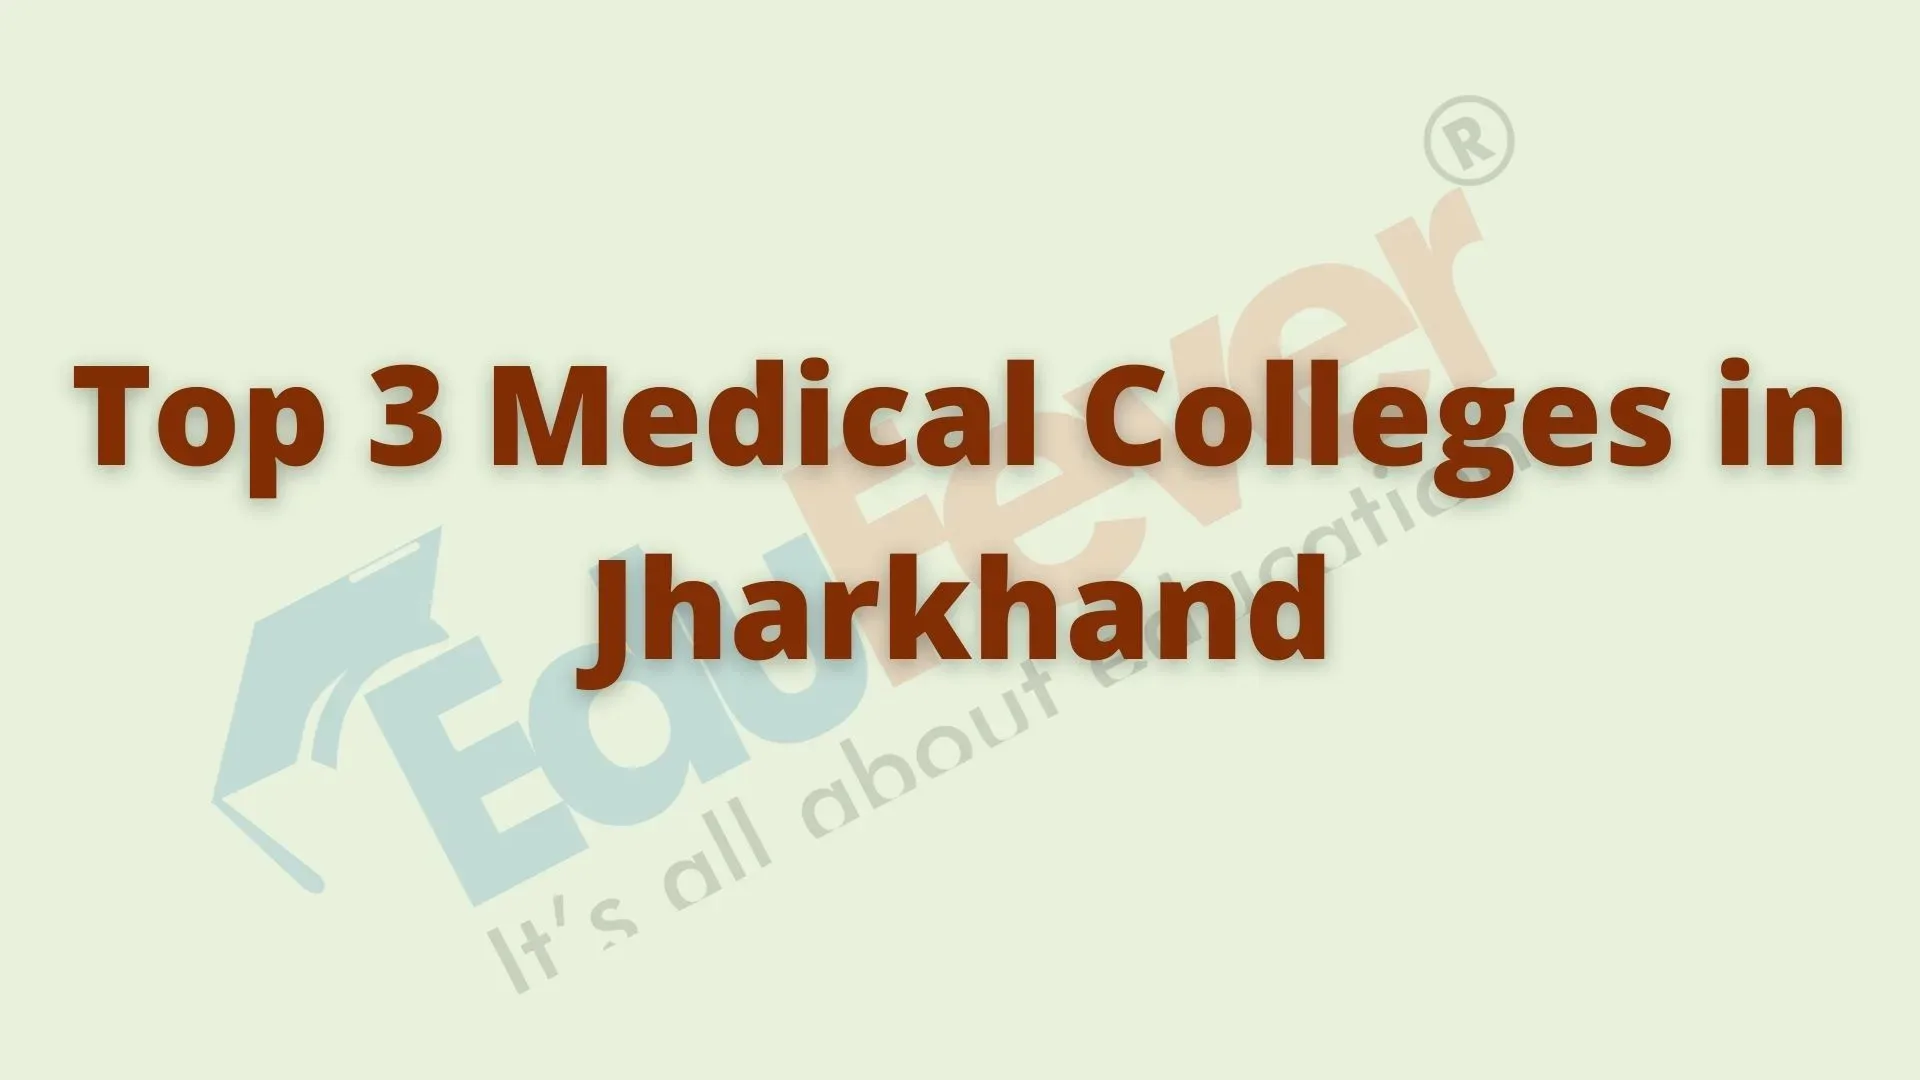 Top 3 Medical Colleges in Jharkhand